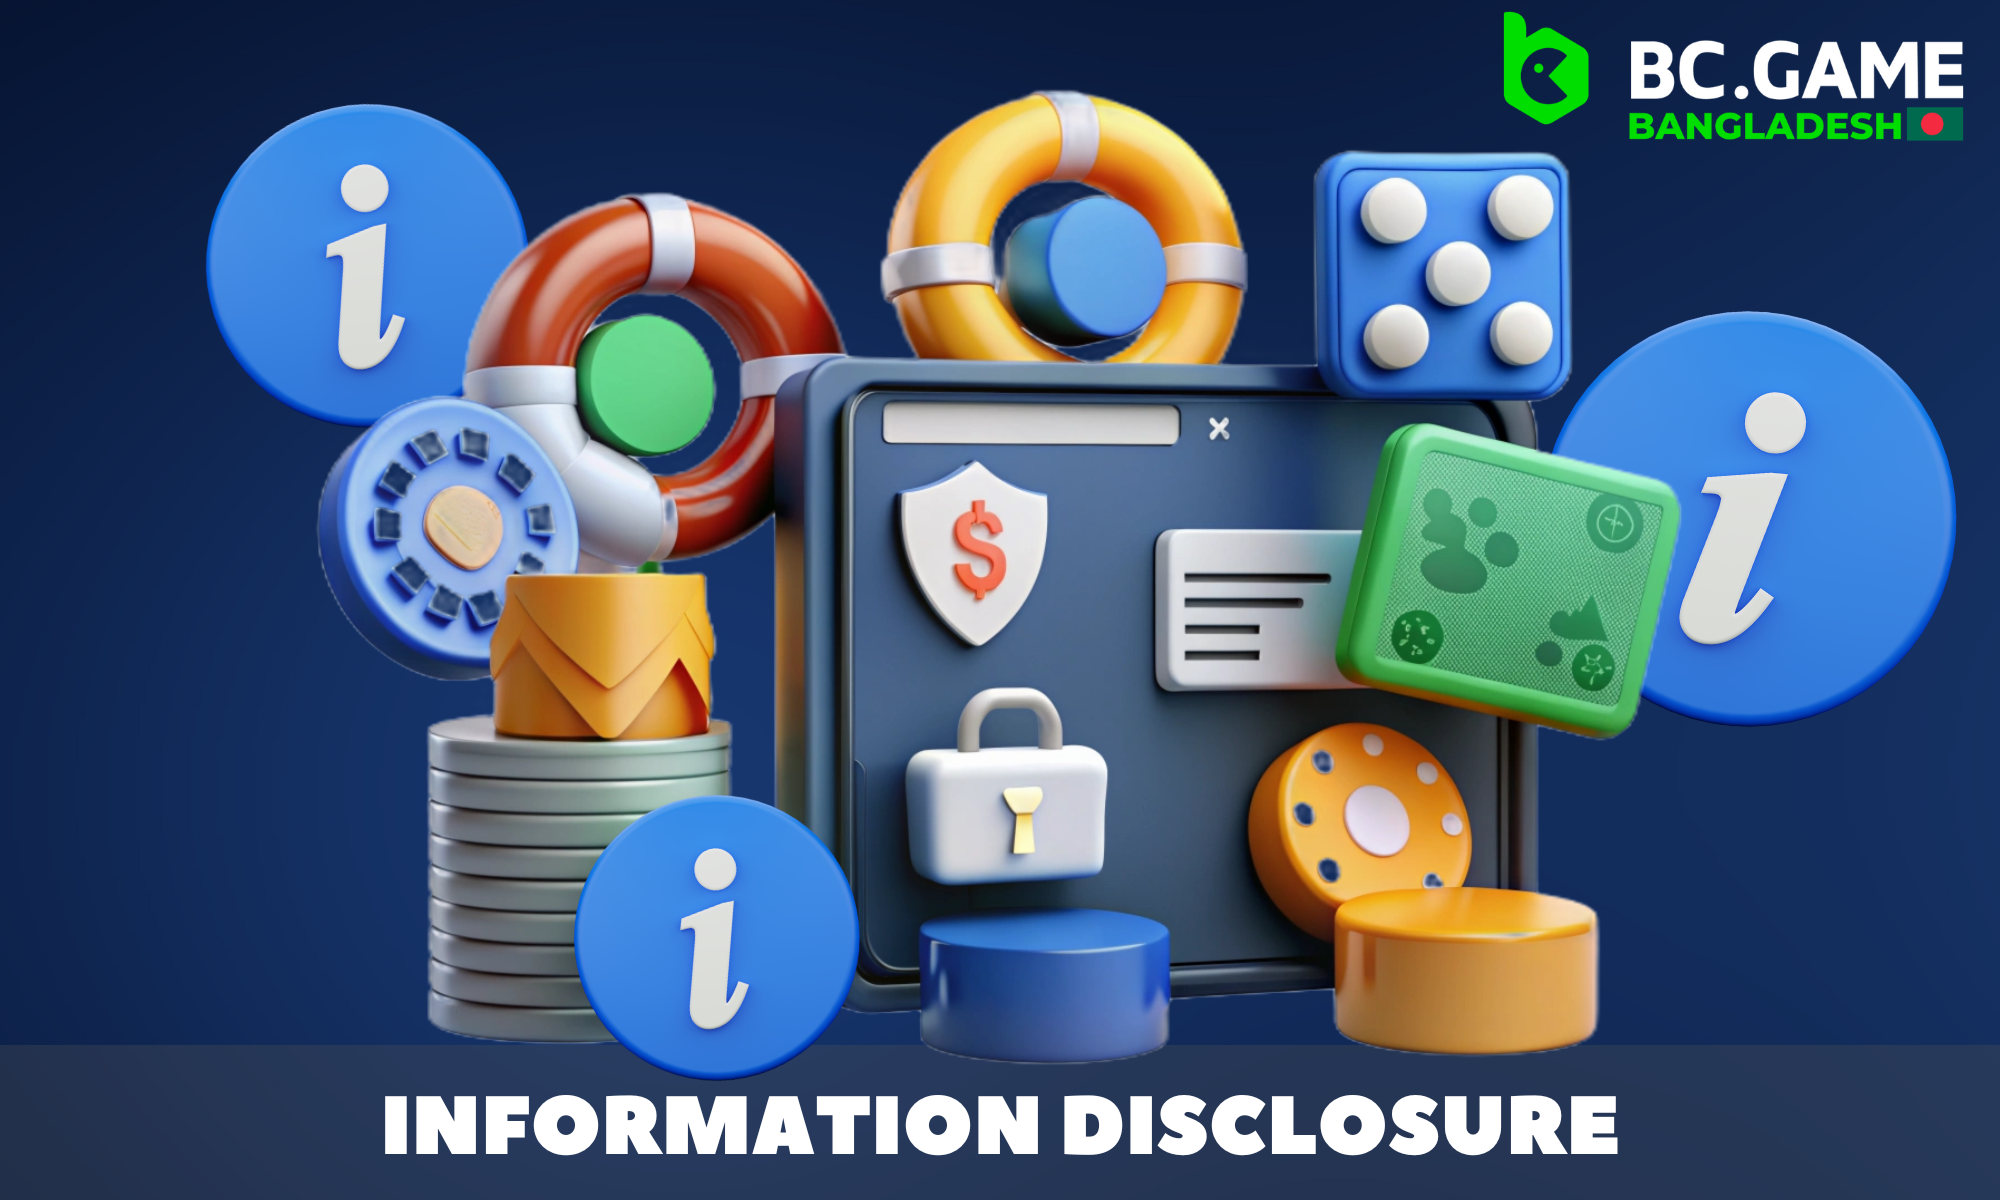 The main reasons why BC.GAME can disclose confidential customer data